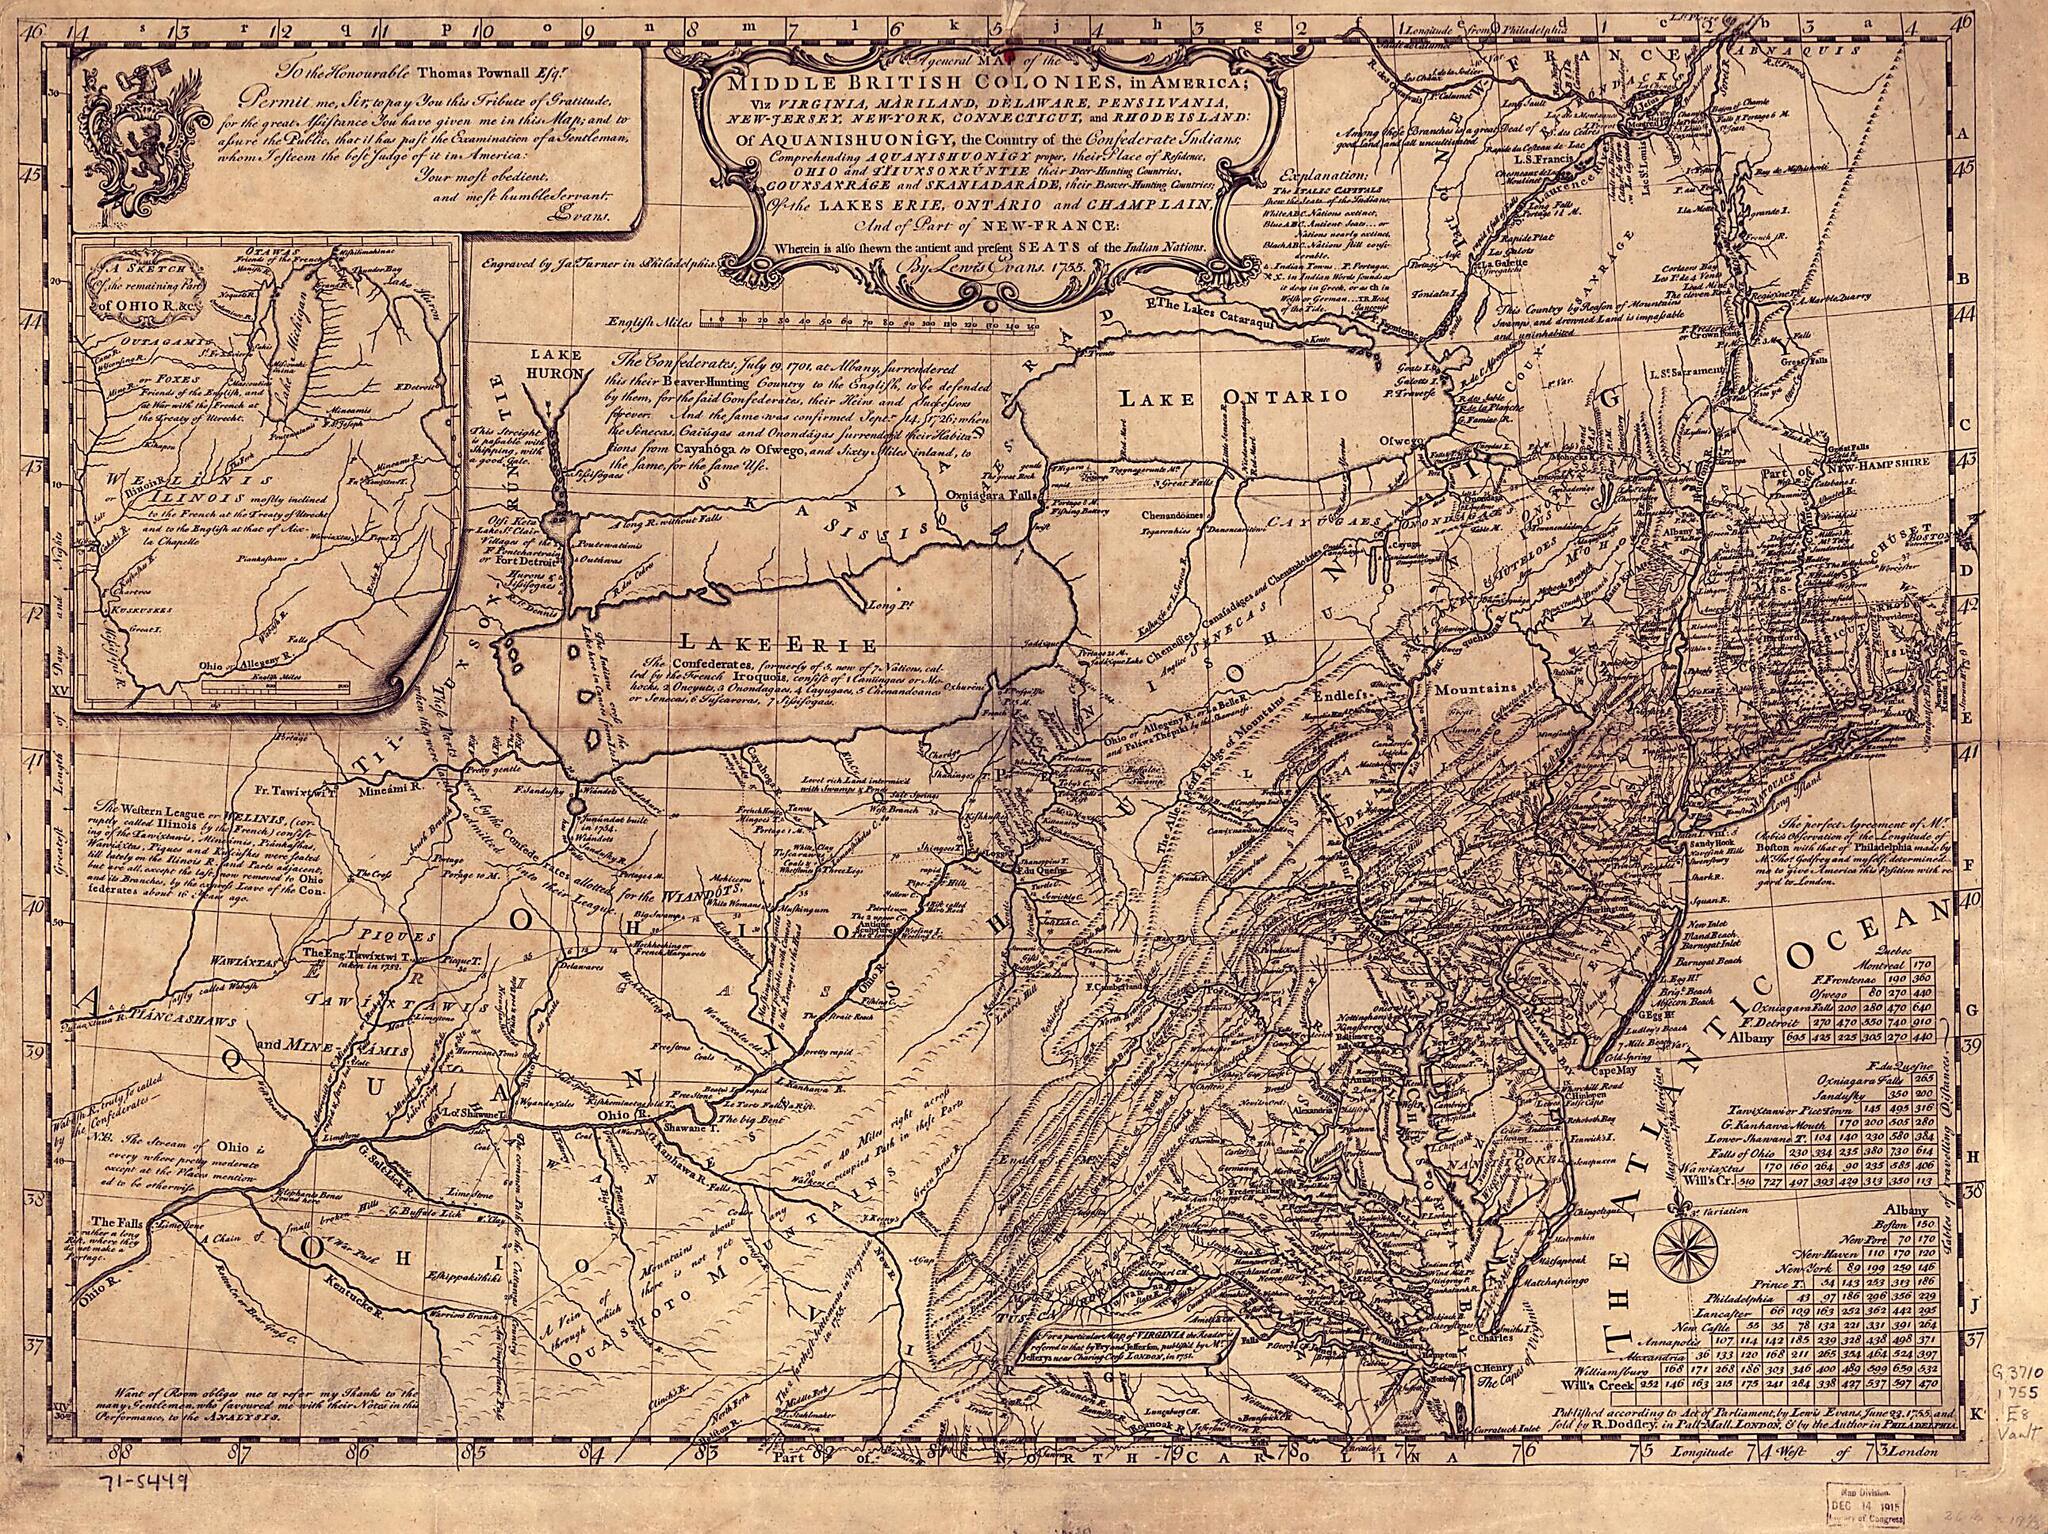 This old map of Jersey, New-York, Connecticut, and Rhode Island: of Aquanishuonîgy, the Country of the Confederate Indians; Comprehending Aquanishuonîgy Proper, Their Place of Residence, Ohio and Tïiuxsoxrúntie, Their Deer-hunting Countries, Couxsaxr